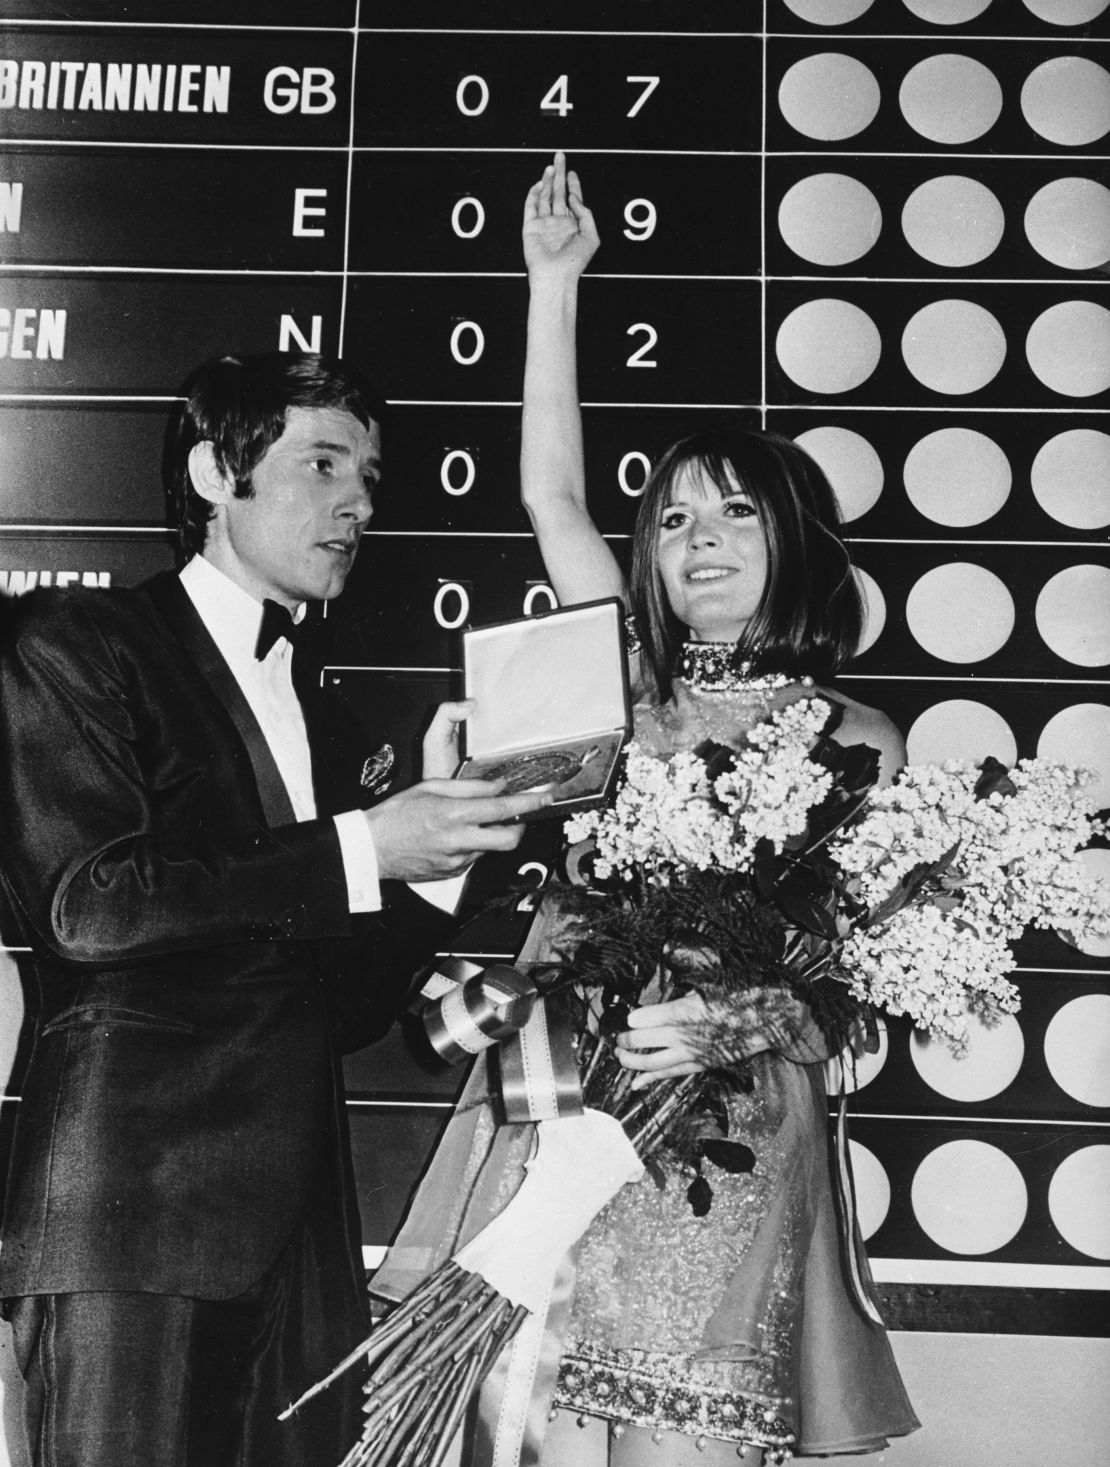 British singer Sandie Shaw wins Eurovision in 1967 with her song "Puppet on a String." 